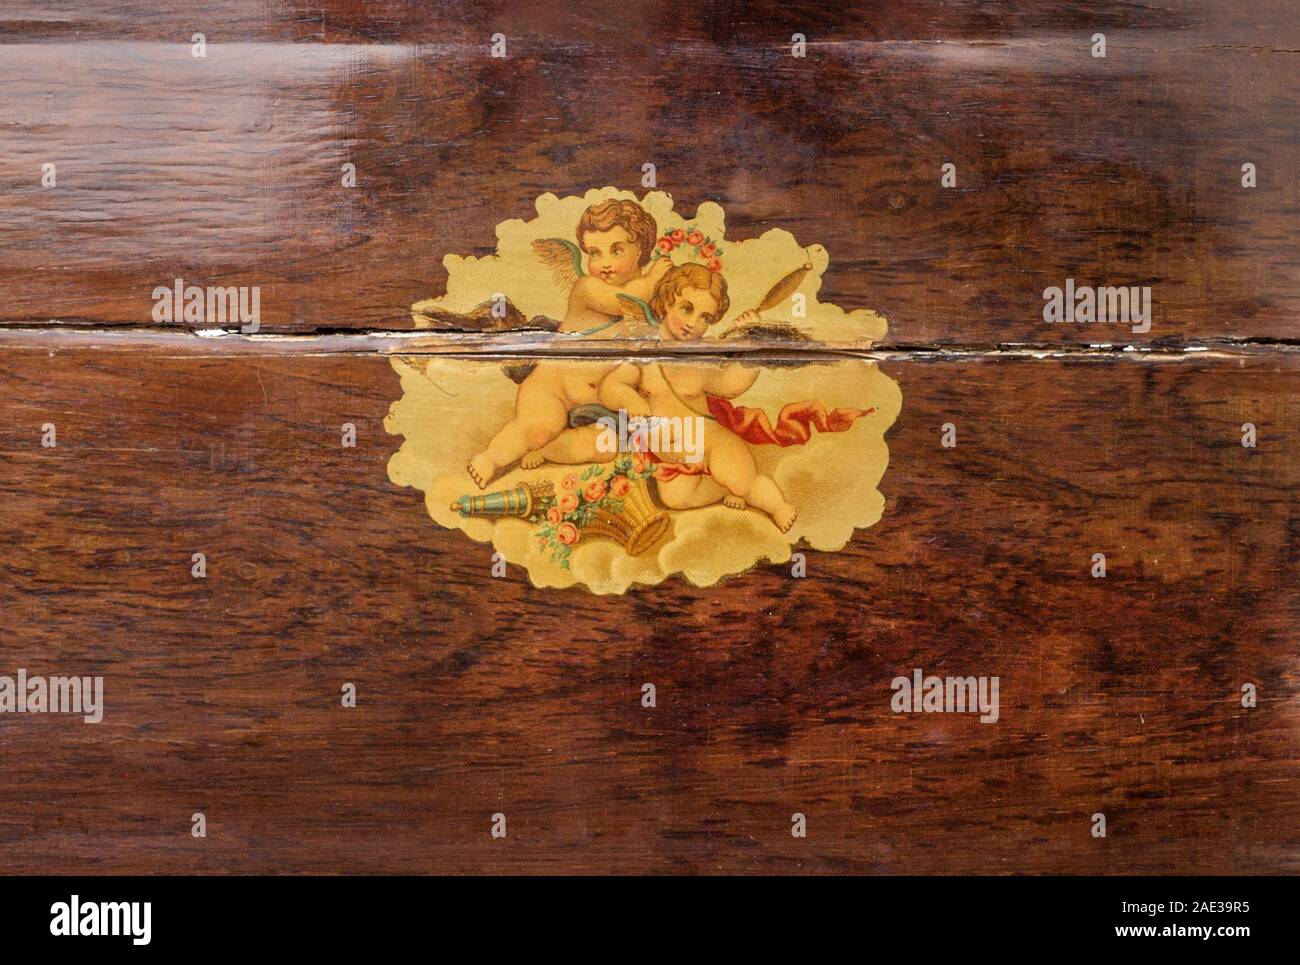 Image of  little angels in the baroque style of antique countertop Stock Photo